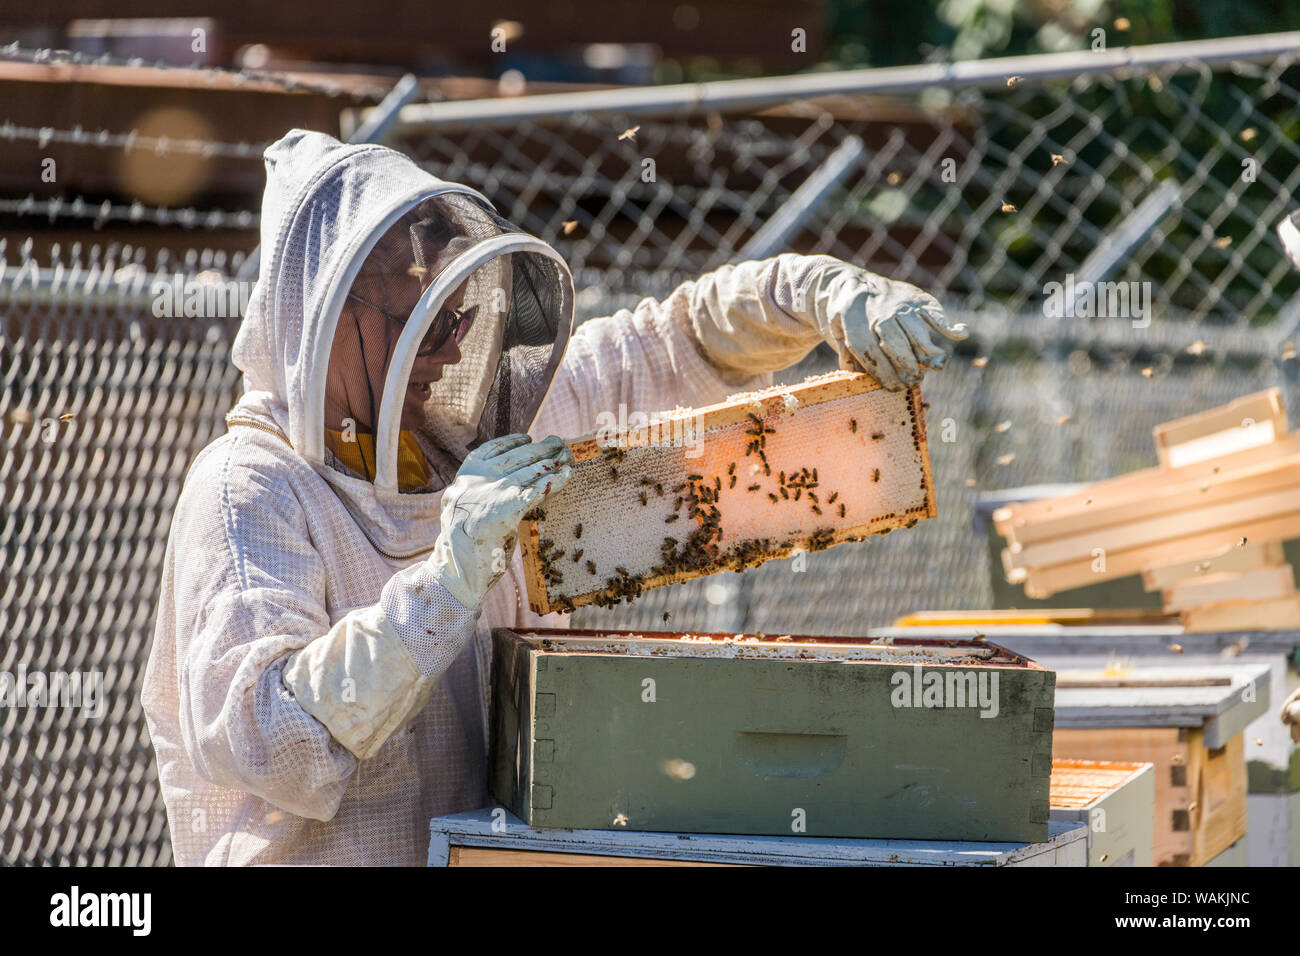 Maple Valley, Washington State, USA. Woman beekeeper checking the health of the honey in a frame. This frame is capped with lovely white beeswax and ready for harvesting. (Editorial Use Only) Stock Photo